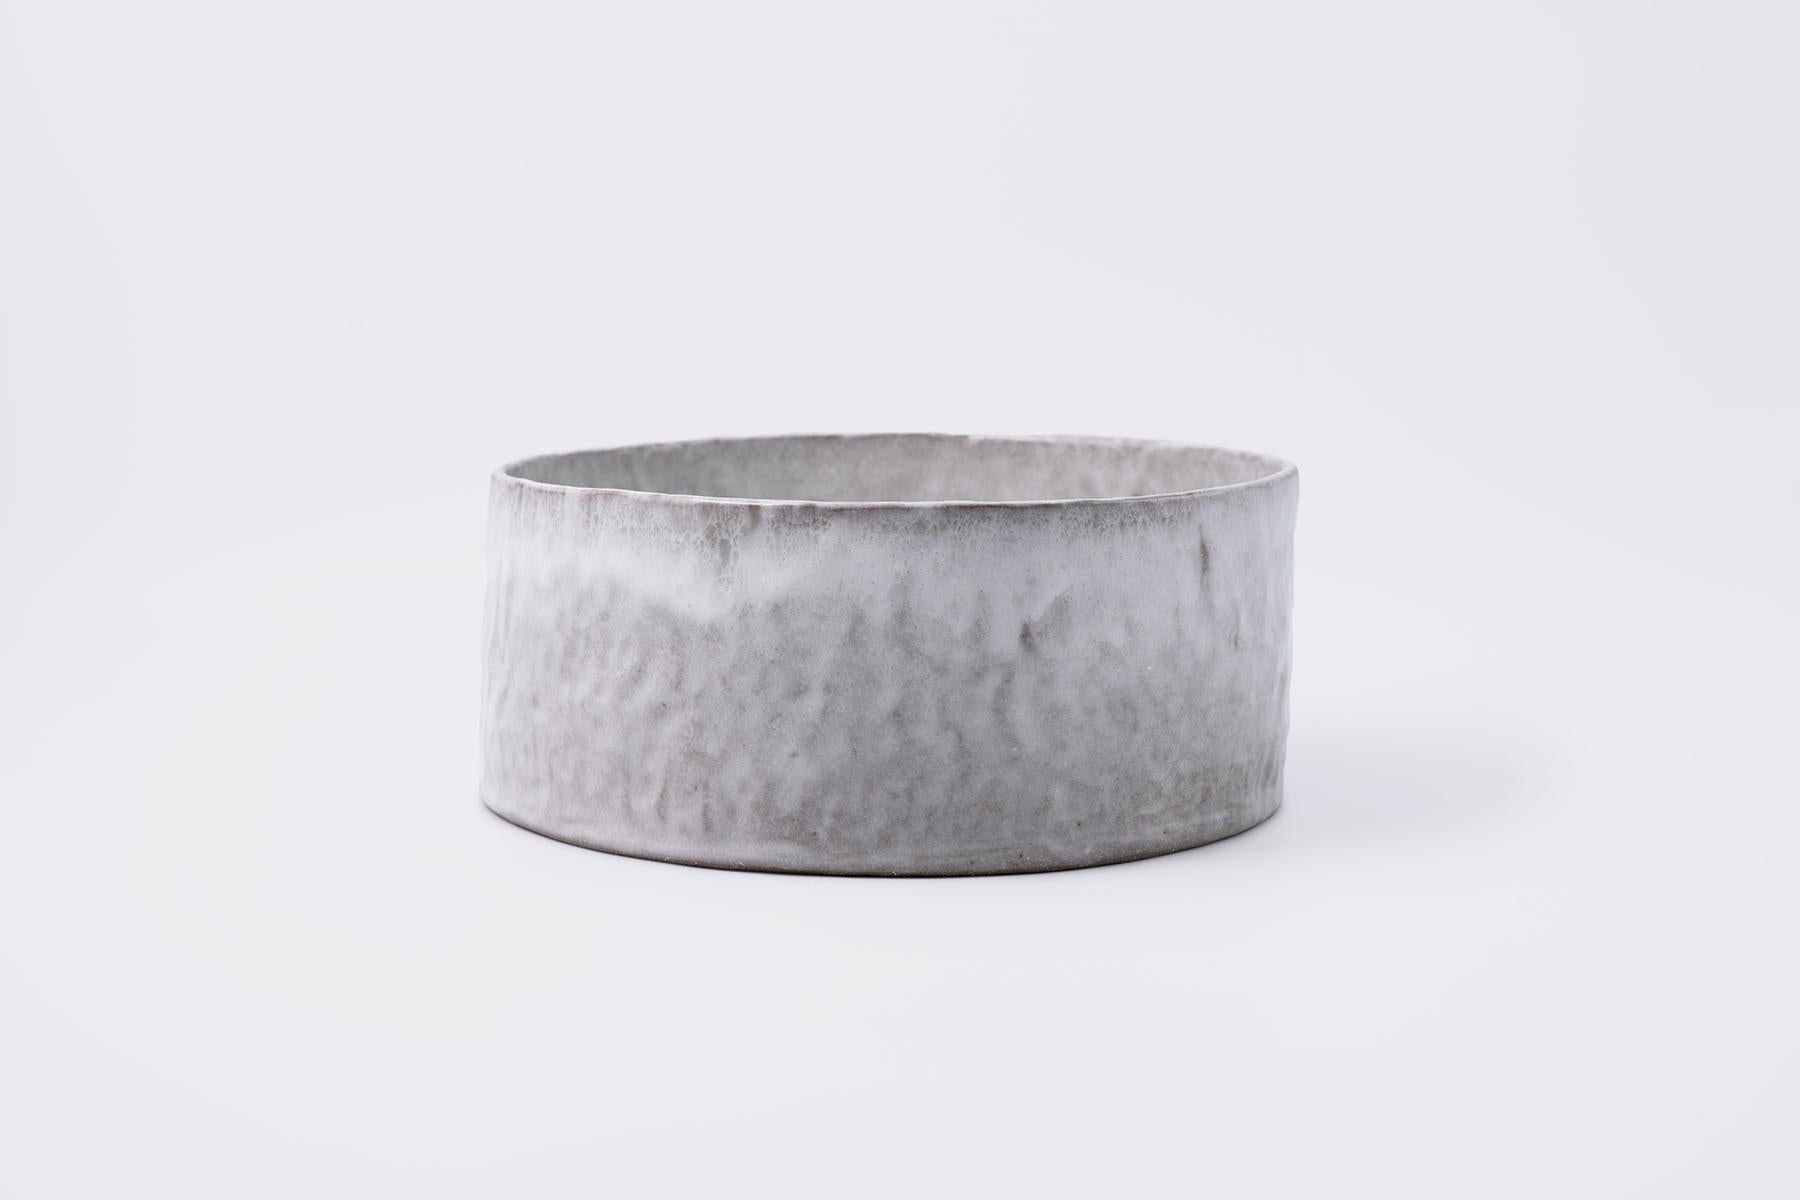 Olga Milczynska bowl by Nów
One of a Kind
Designed by Olga Milczynska
Dimensions: D 25 x W 25 x H 9 cm
Materials: glazed stoneware

A graduate of the ceramics department of the Royal Danish Academy of Fine Arts, Uniwersity of Fine Arts in